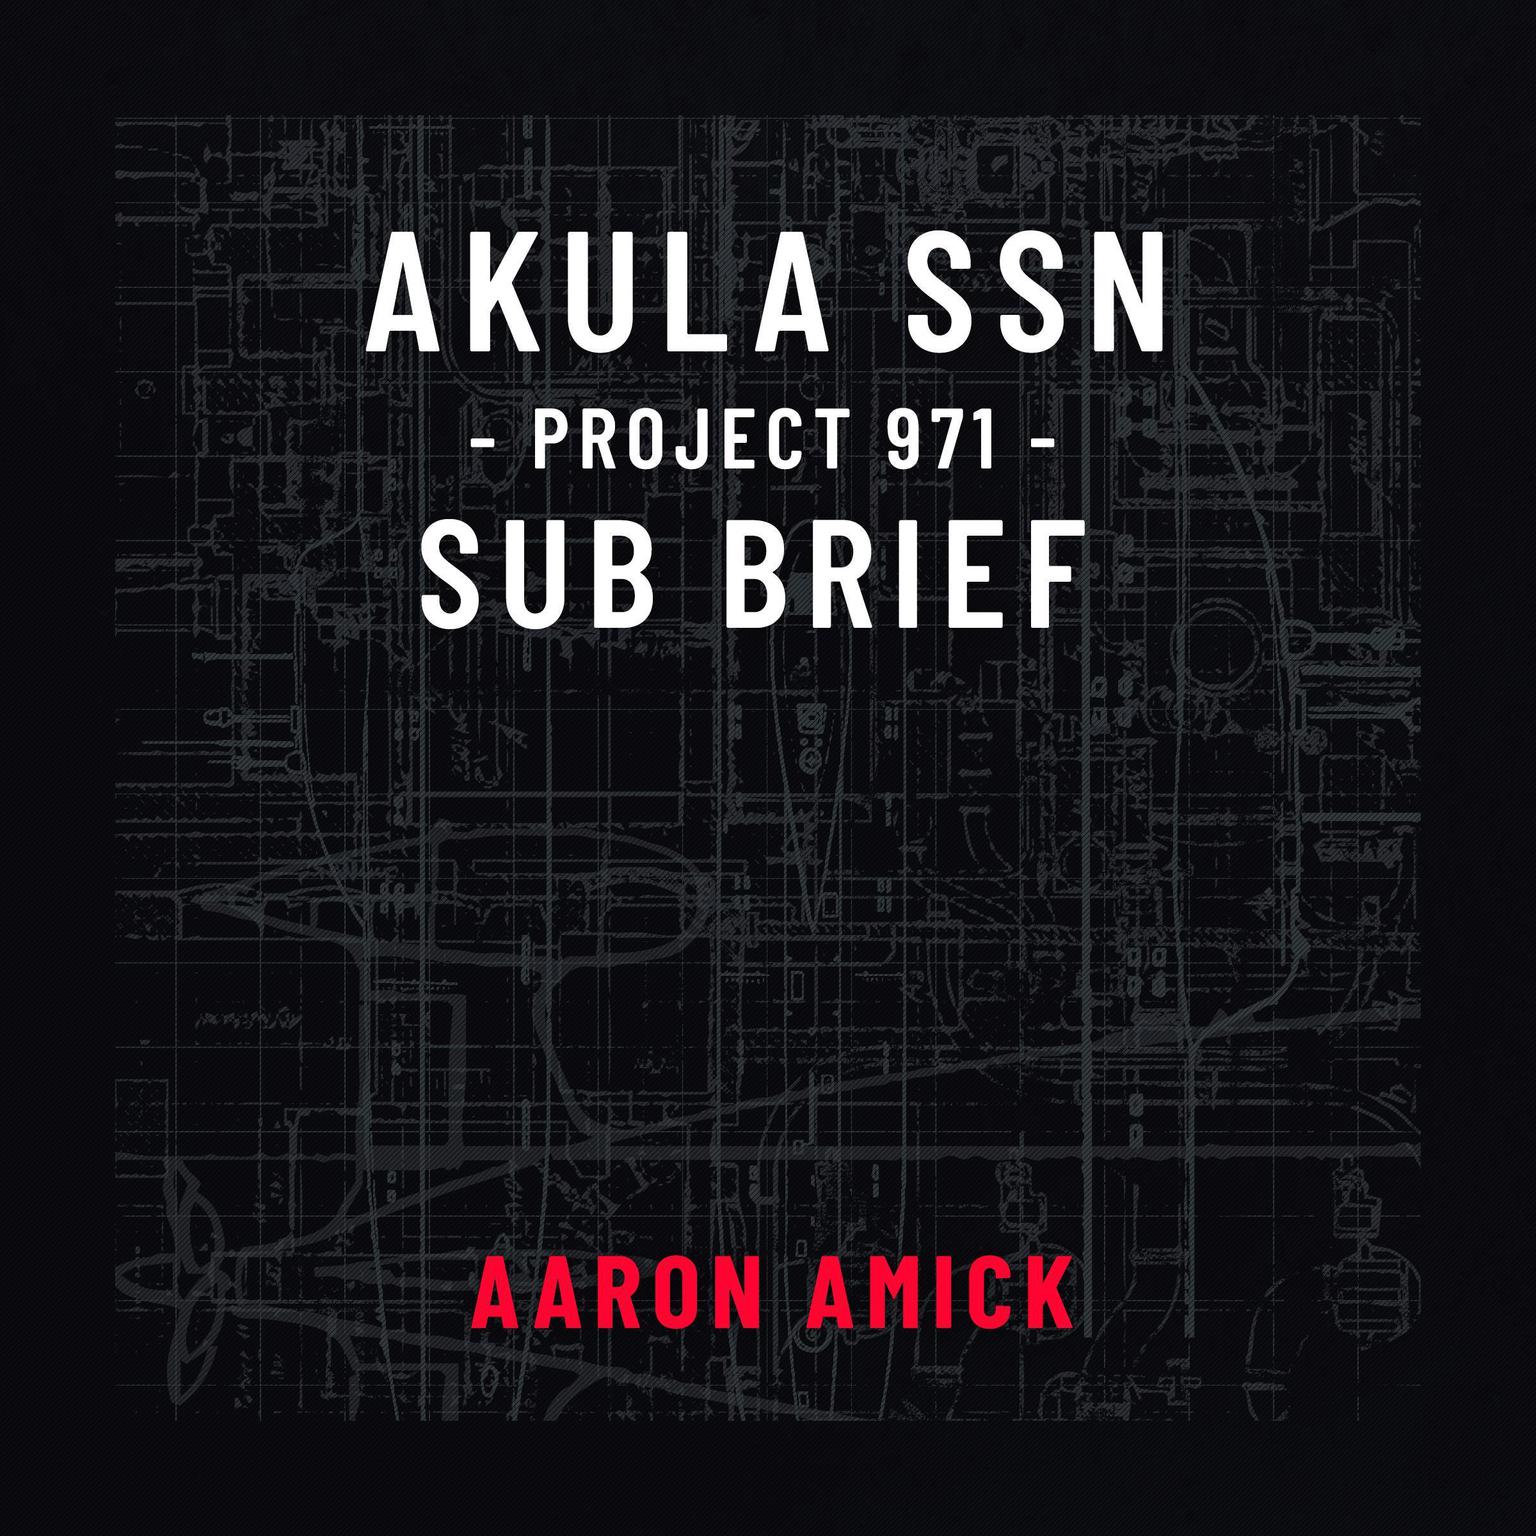 Project 971 Akula Sub Brief Audiobook, by Aaron Amick